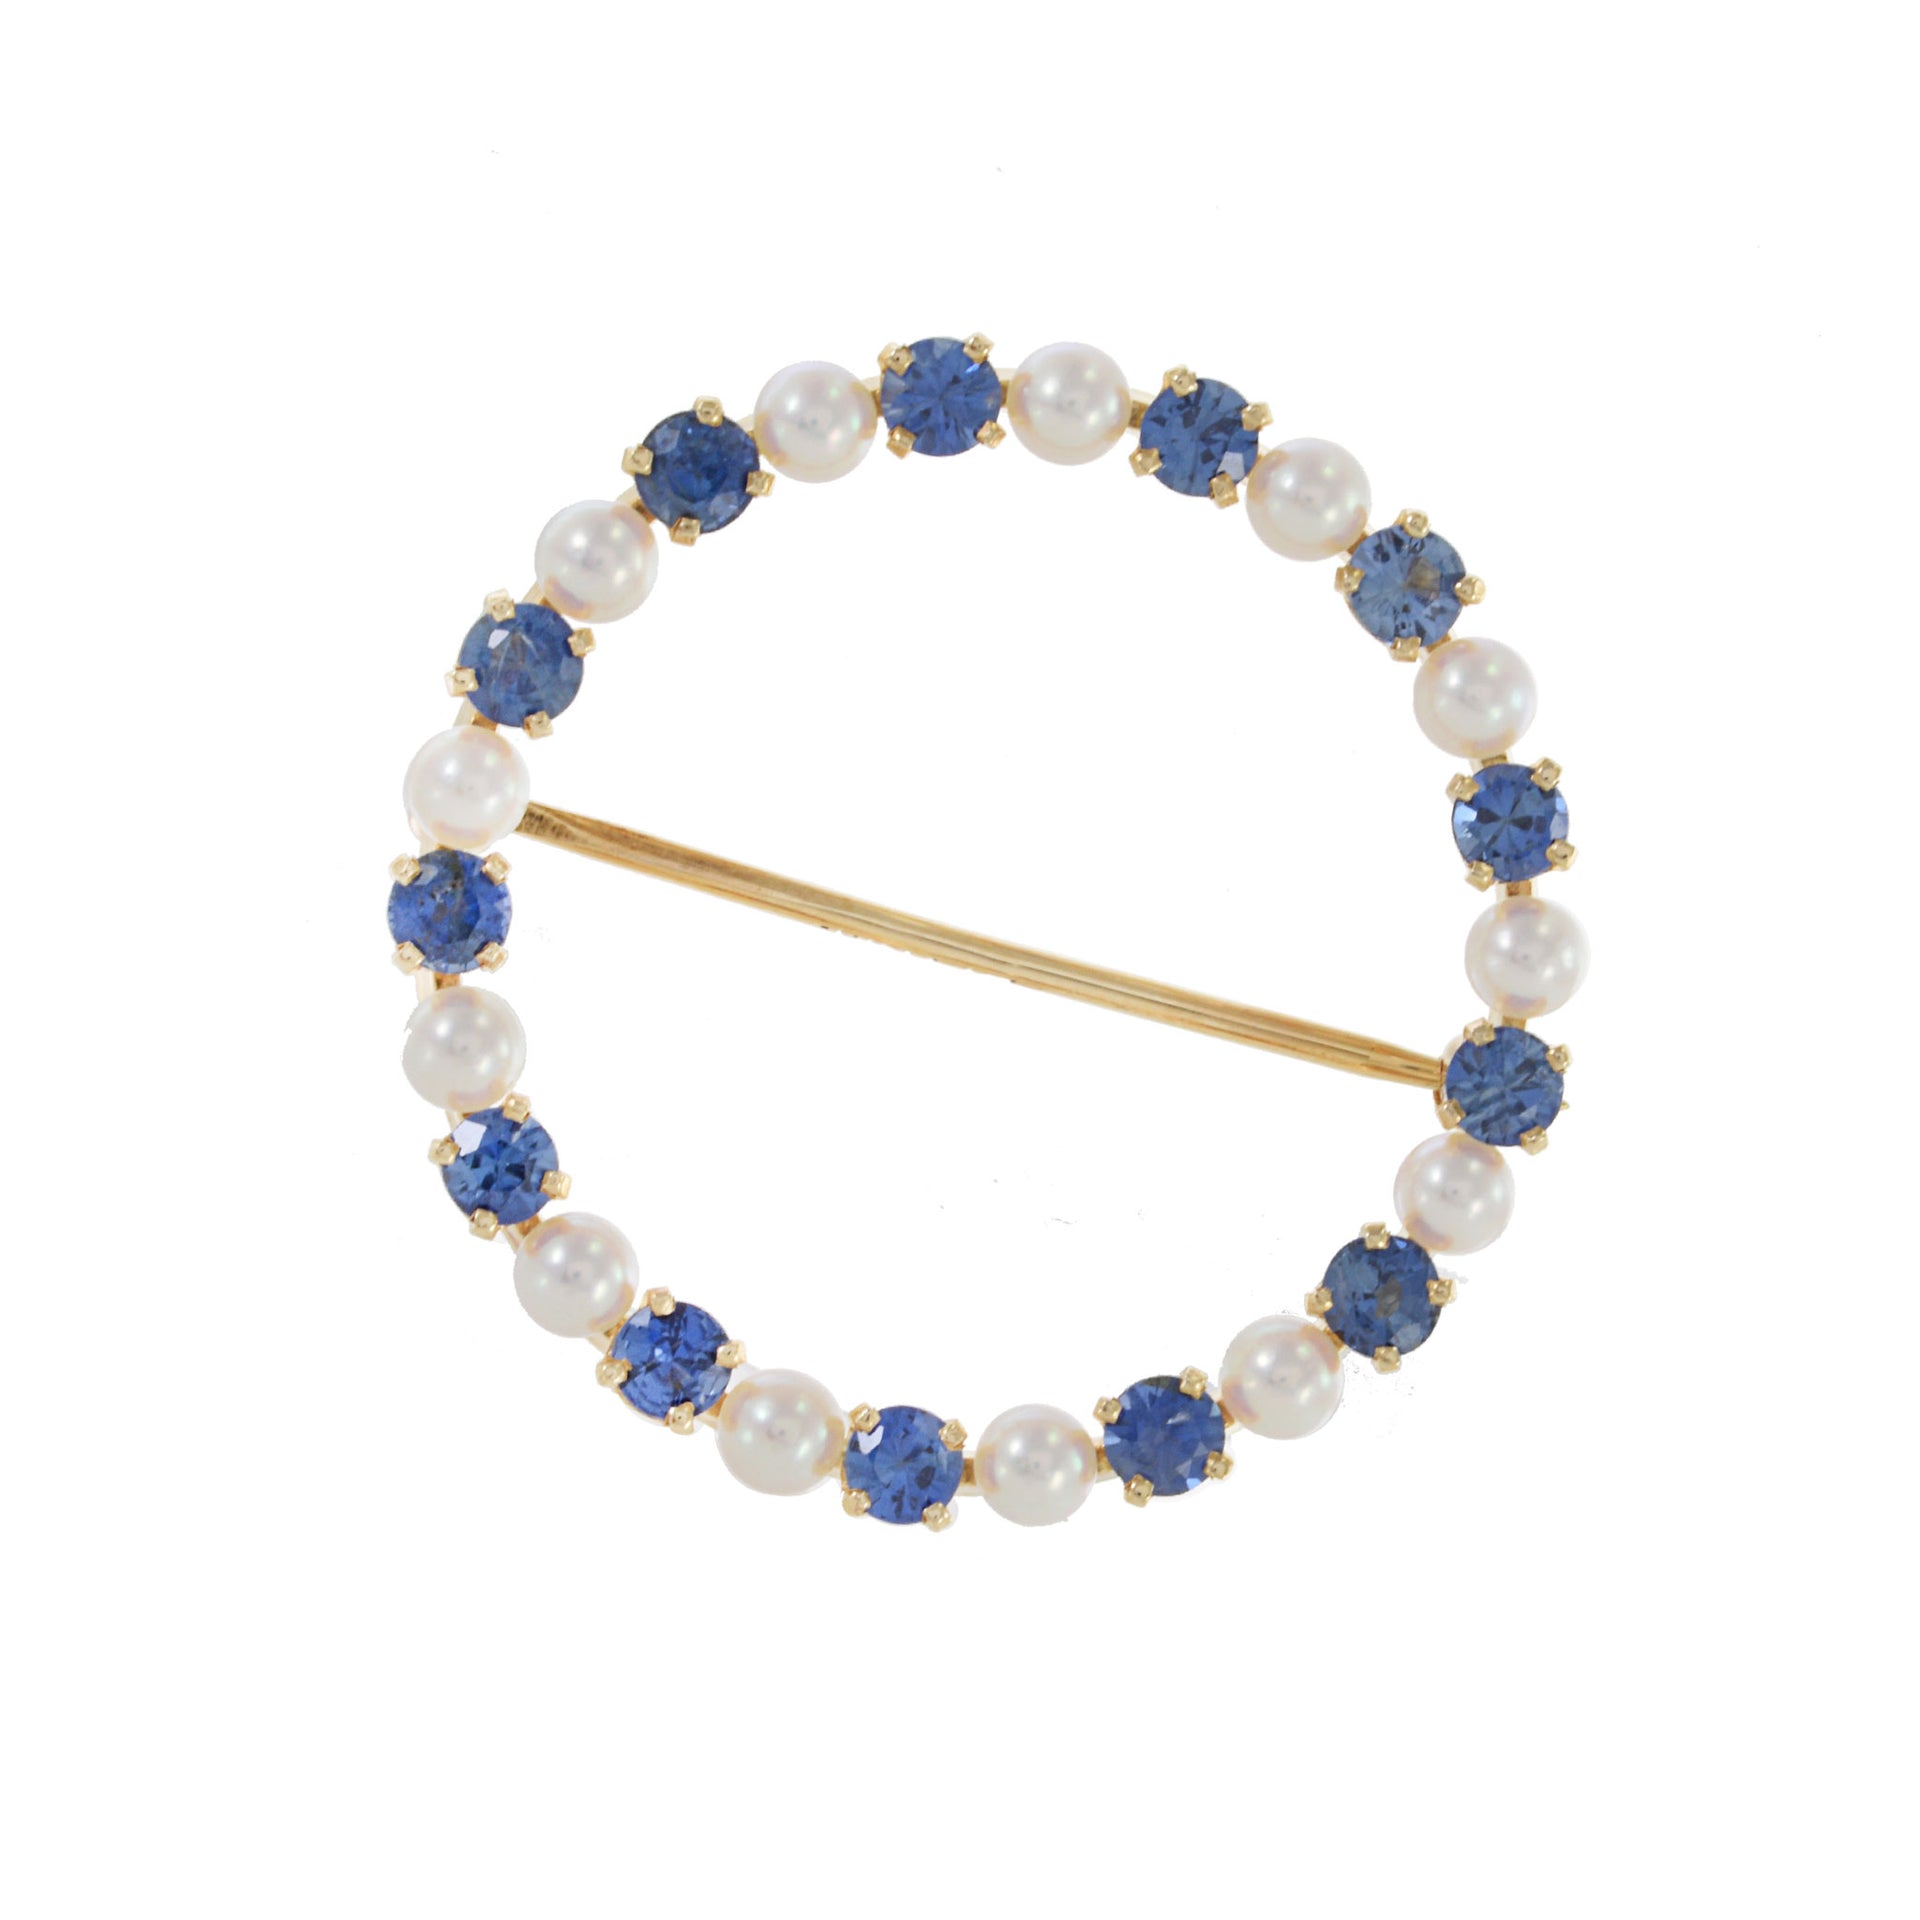 Vintage 1970's 14KT Yellow Gold Pearl and Sapphire Circle Brooch